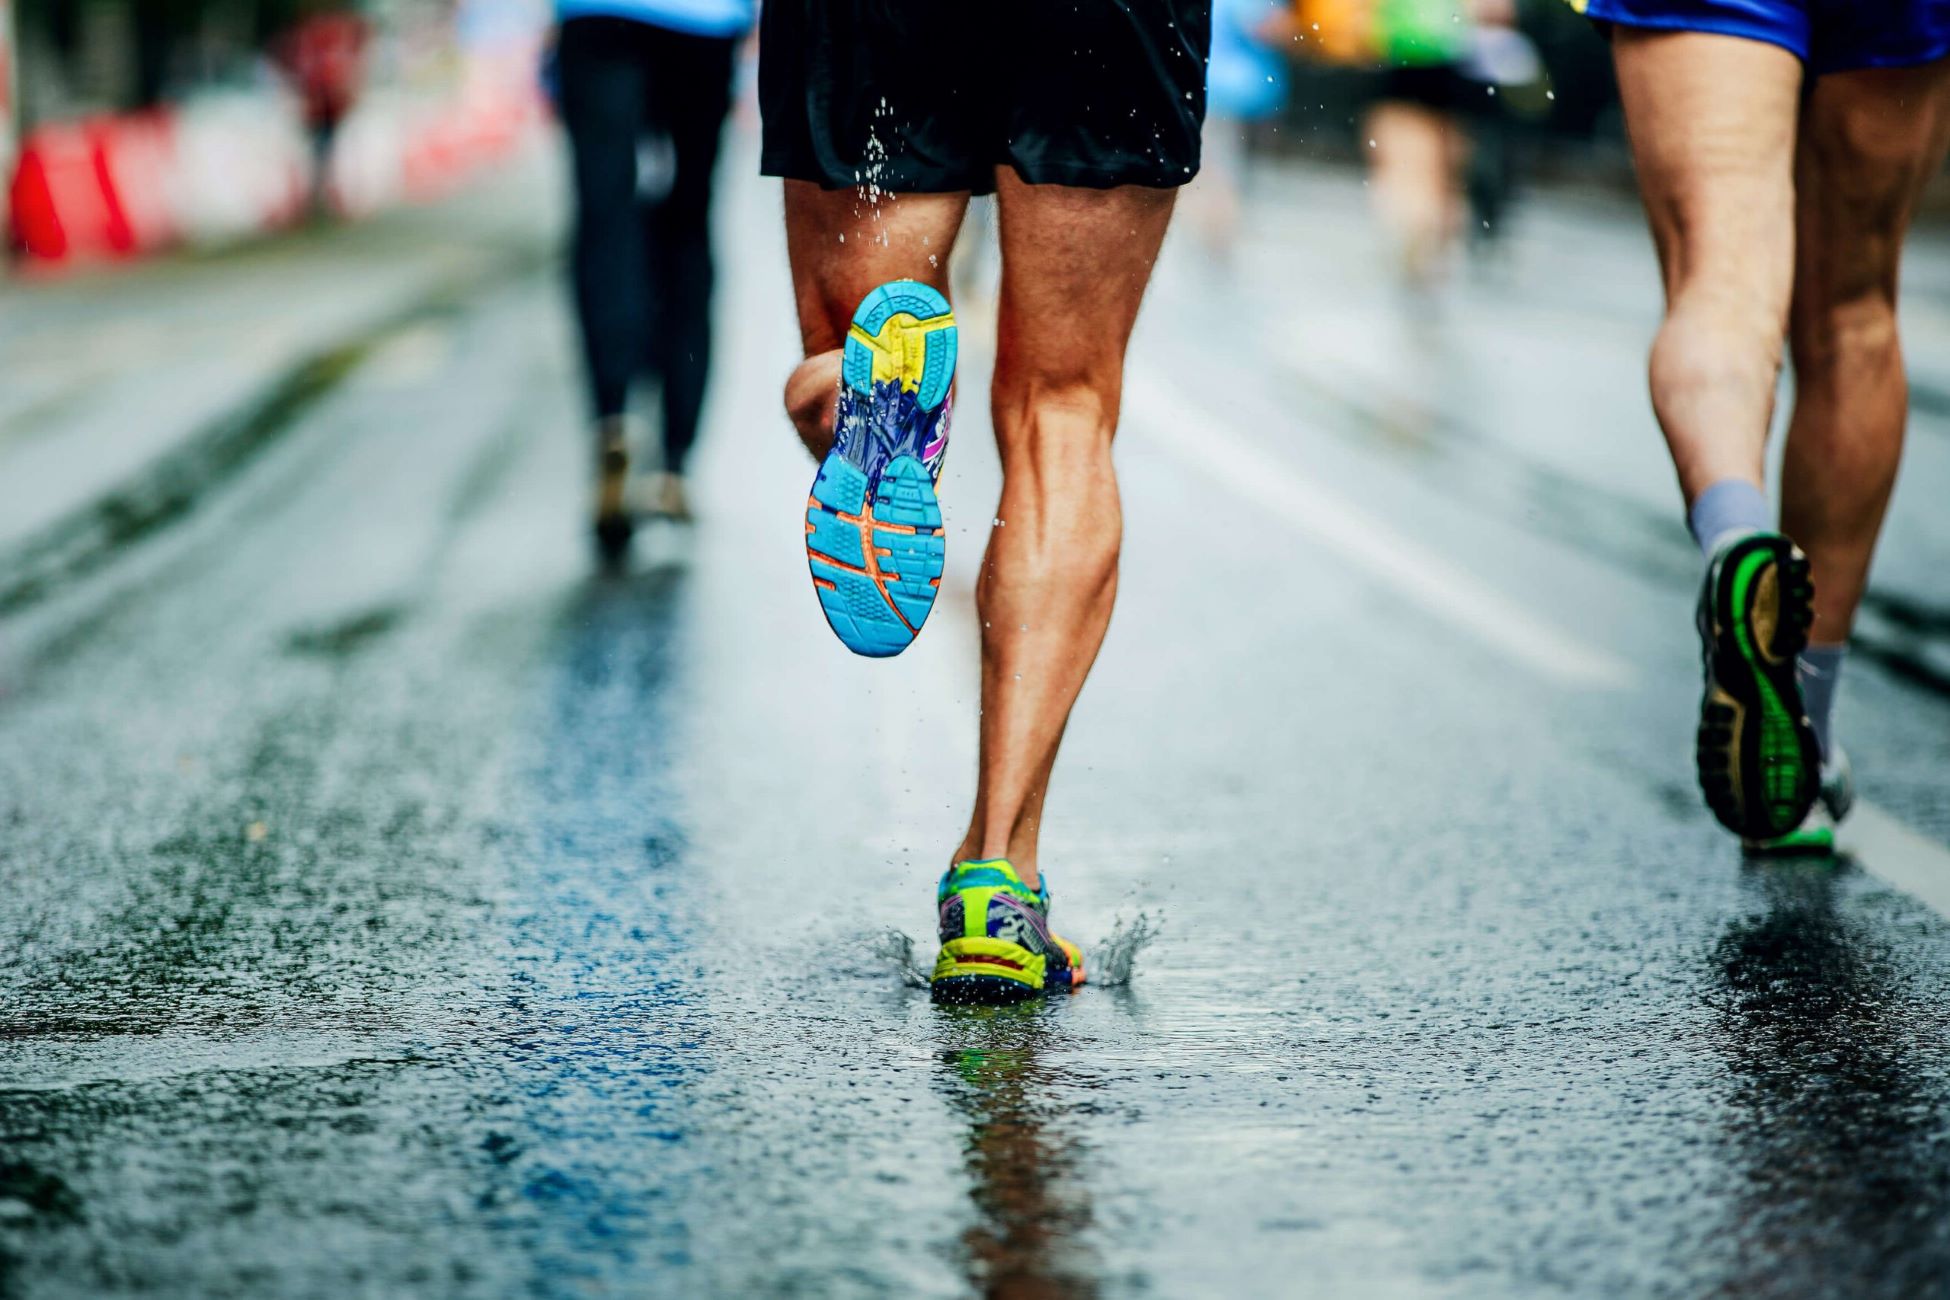 How Does Leg-length Discrepancy Contribute To Knee Pain During Running?